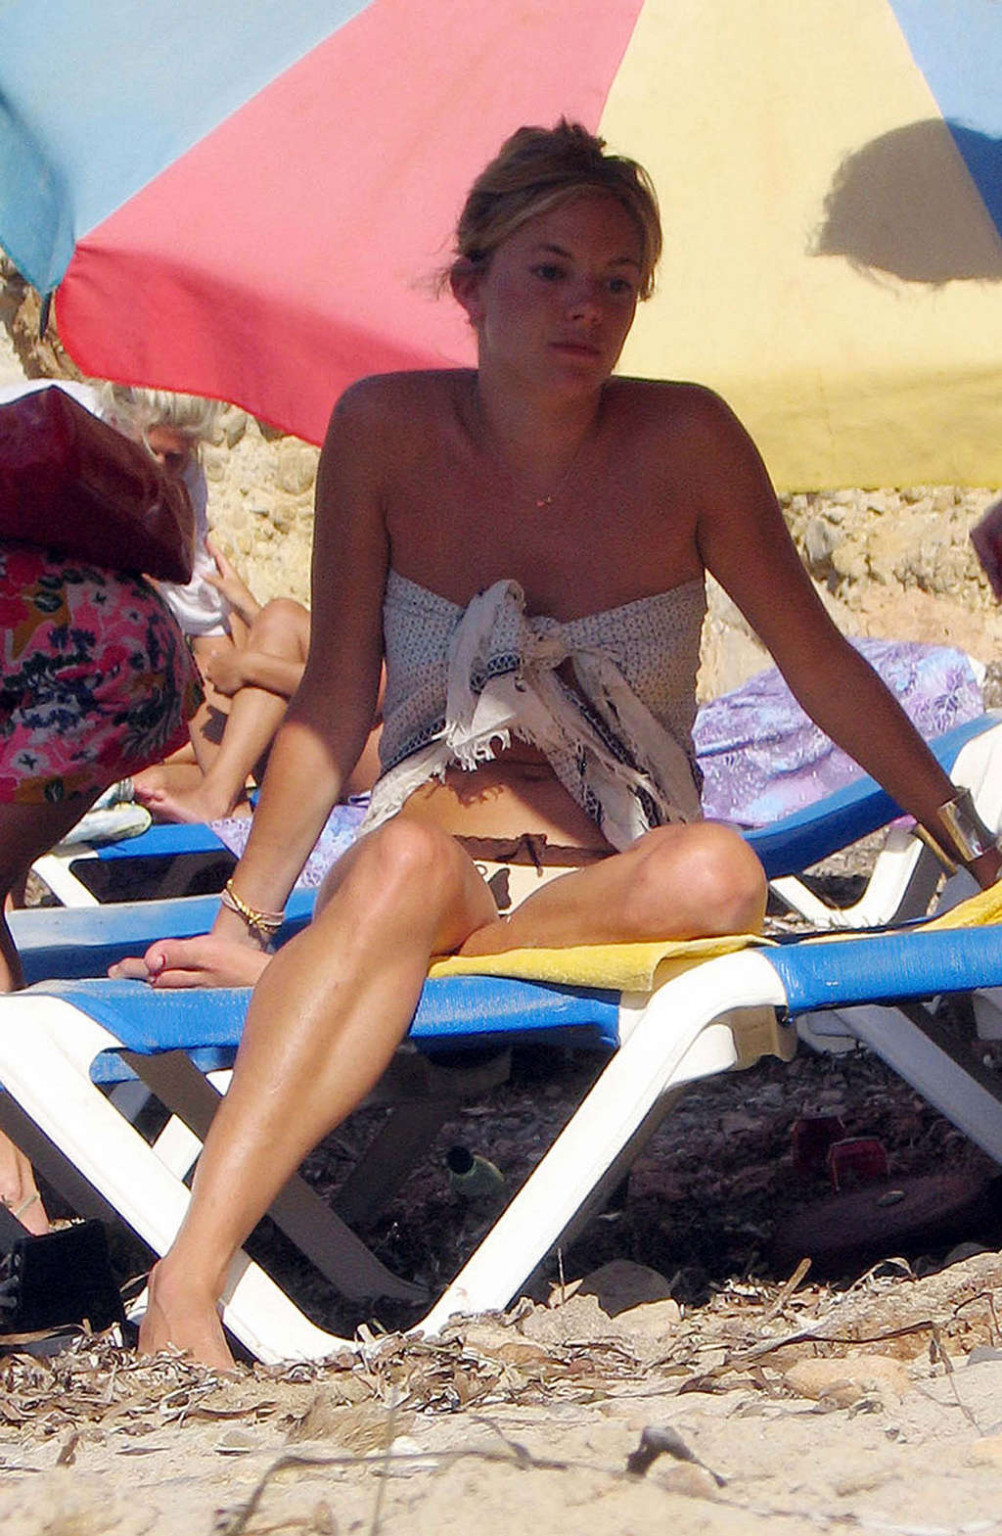 Sienna Miller revealing her nice big tits on beach paparazzi shoots and in movie #75351684